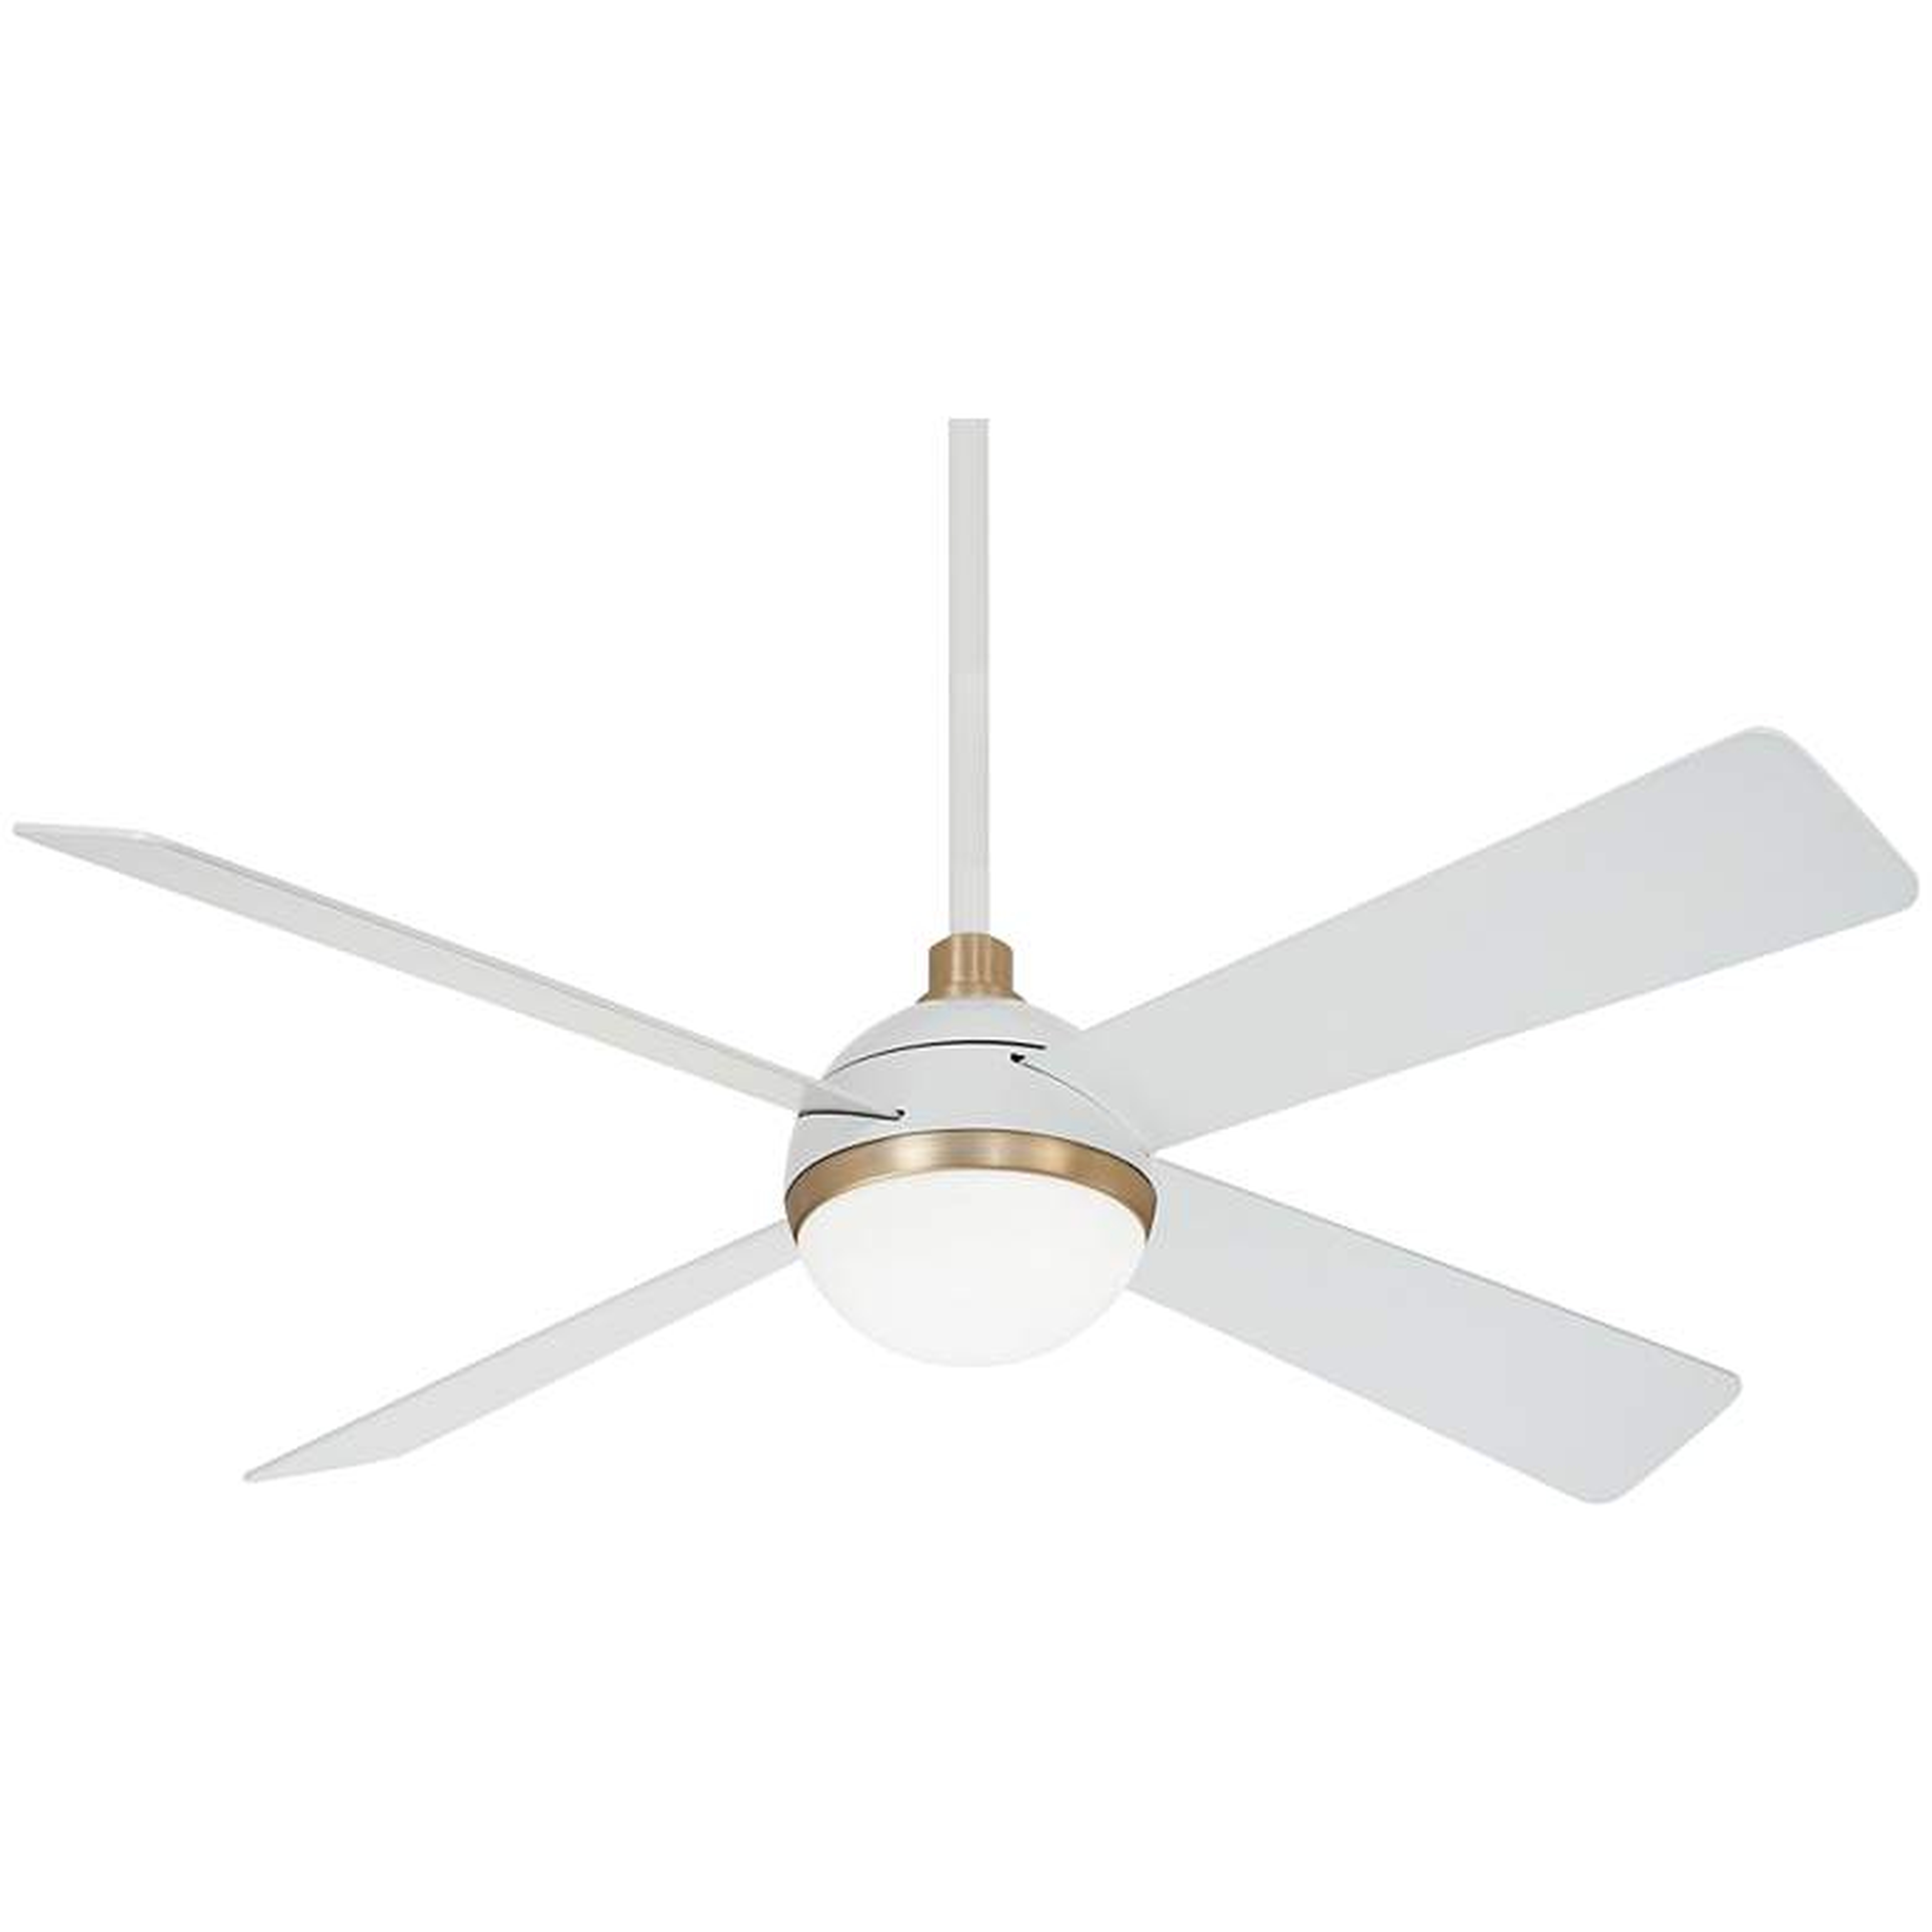 54" Minka Aire Orb Flat Orb Brushed Brass LED Ceiling Fan with Remote Control - Lamps Plus